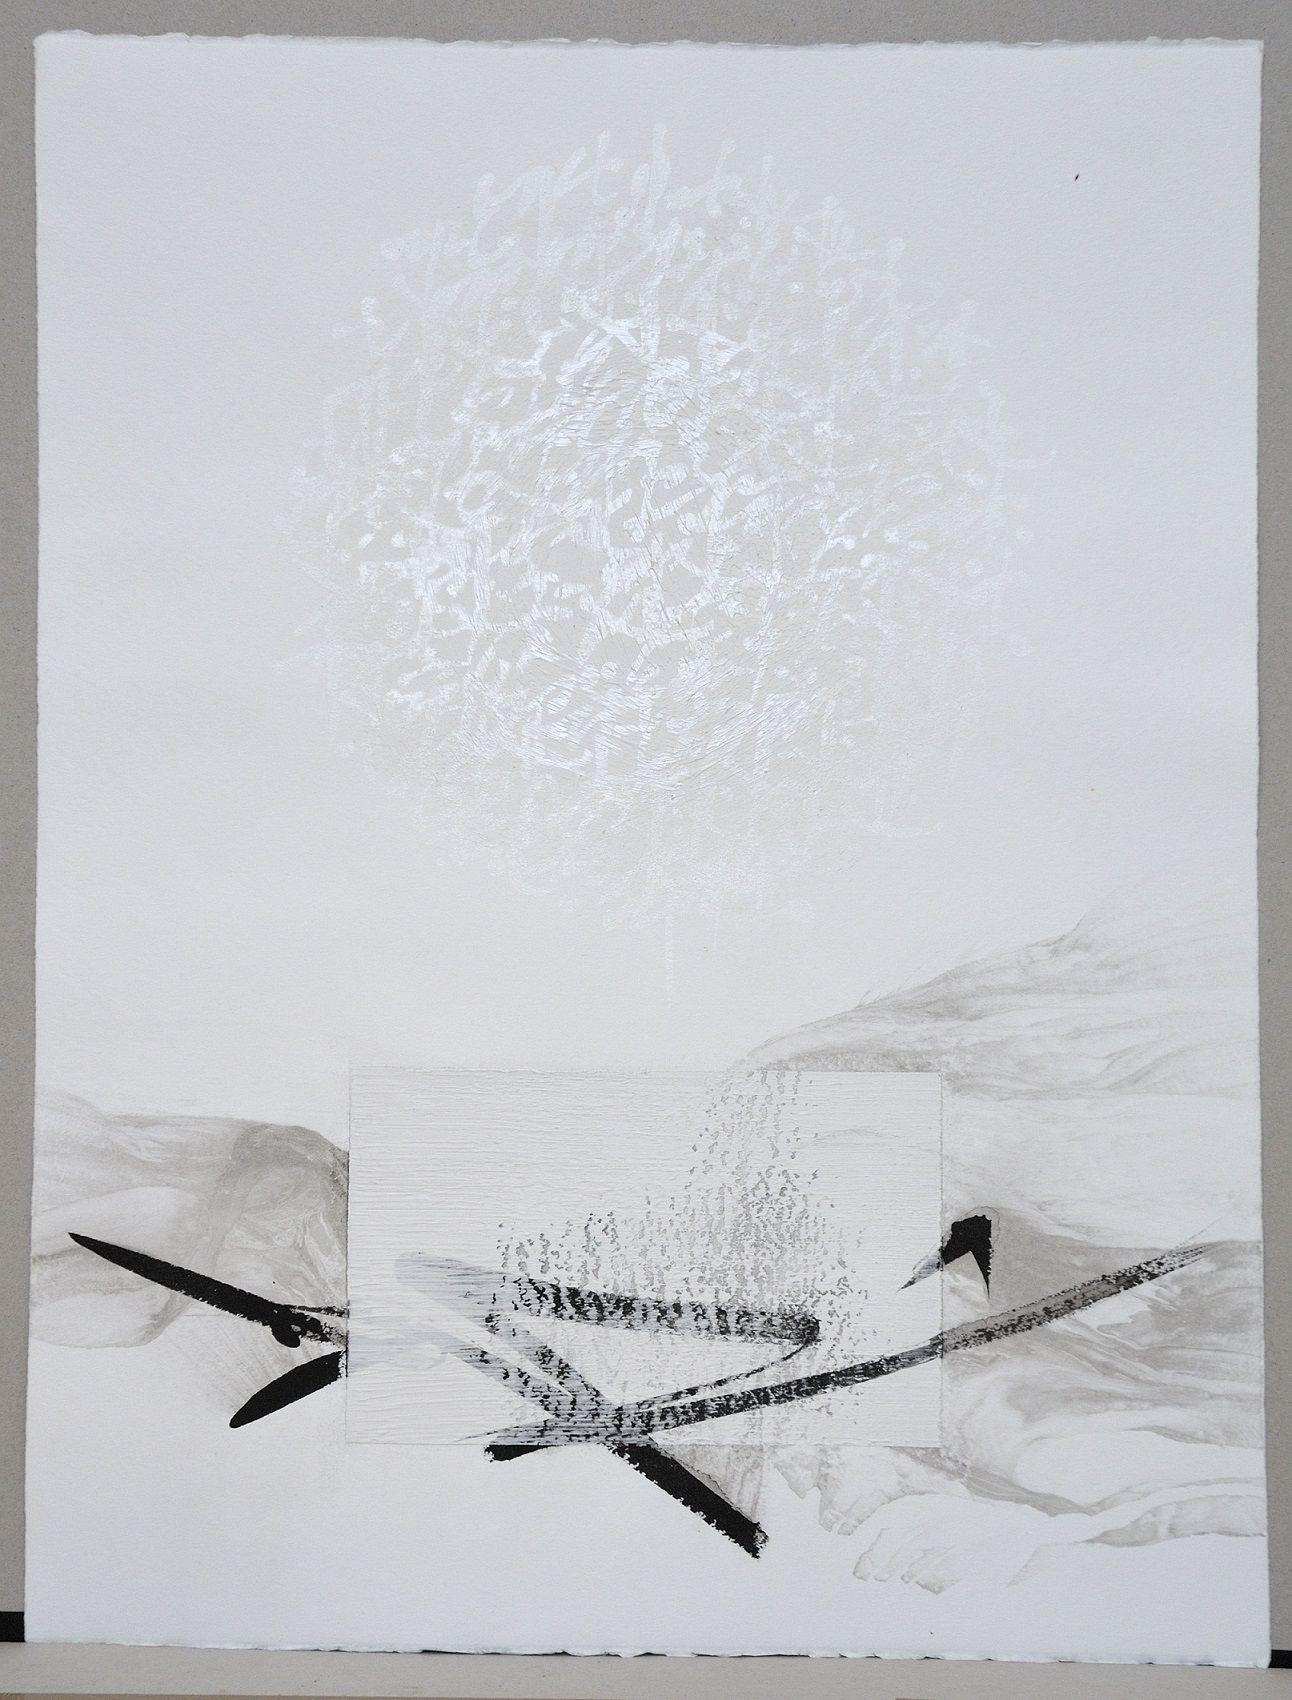 Permanescence N528 is a unique ink and acrylic on paper painting by Japanese contemporary artist Hachiro Kanno, dimensions are 65 × 50 cm (25.6 × 19.7 in). 
The artwork is signed, sold unframed and comes with a certificate of authenticity.

Hachiro